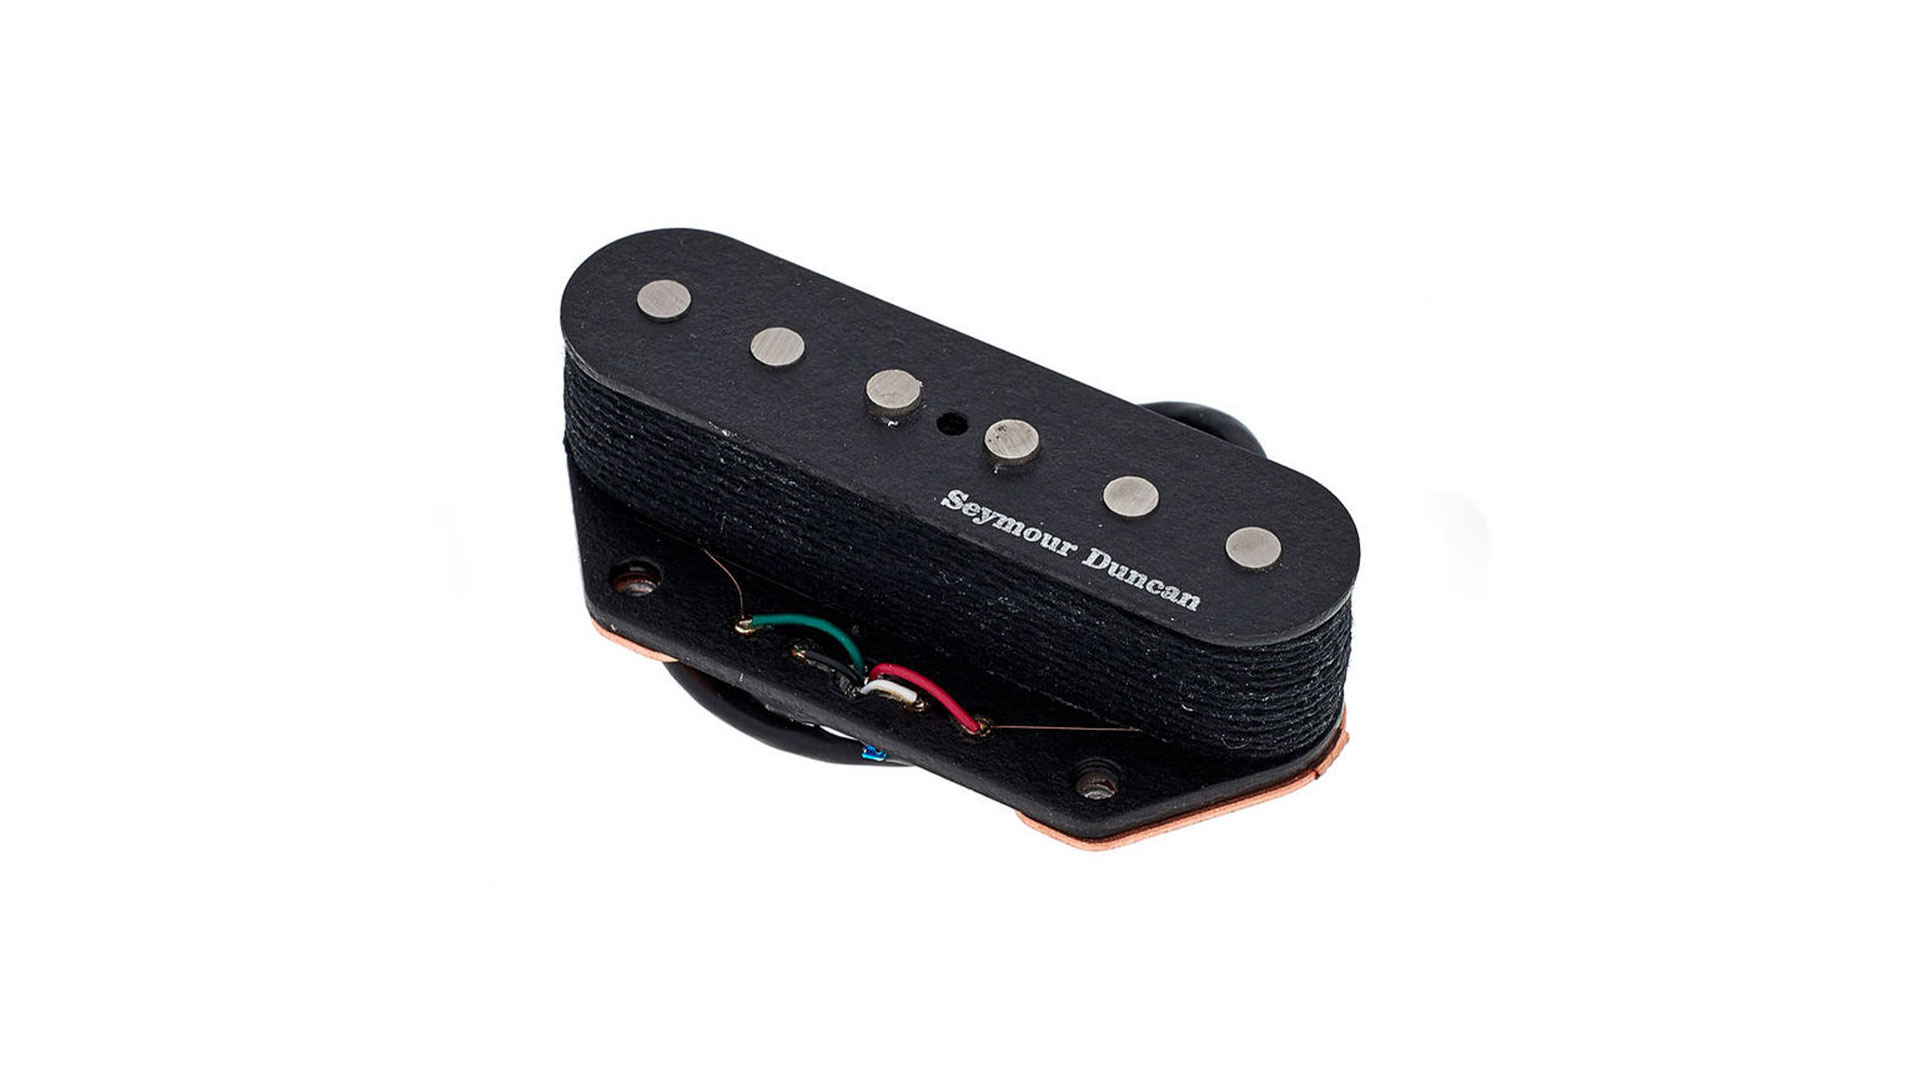 Top Humbuckers in Single-Coil Size